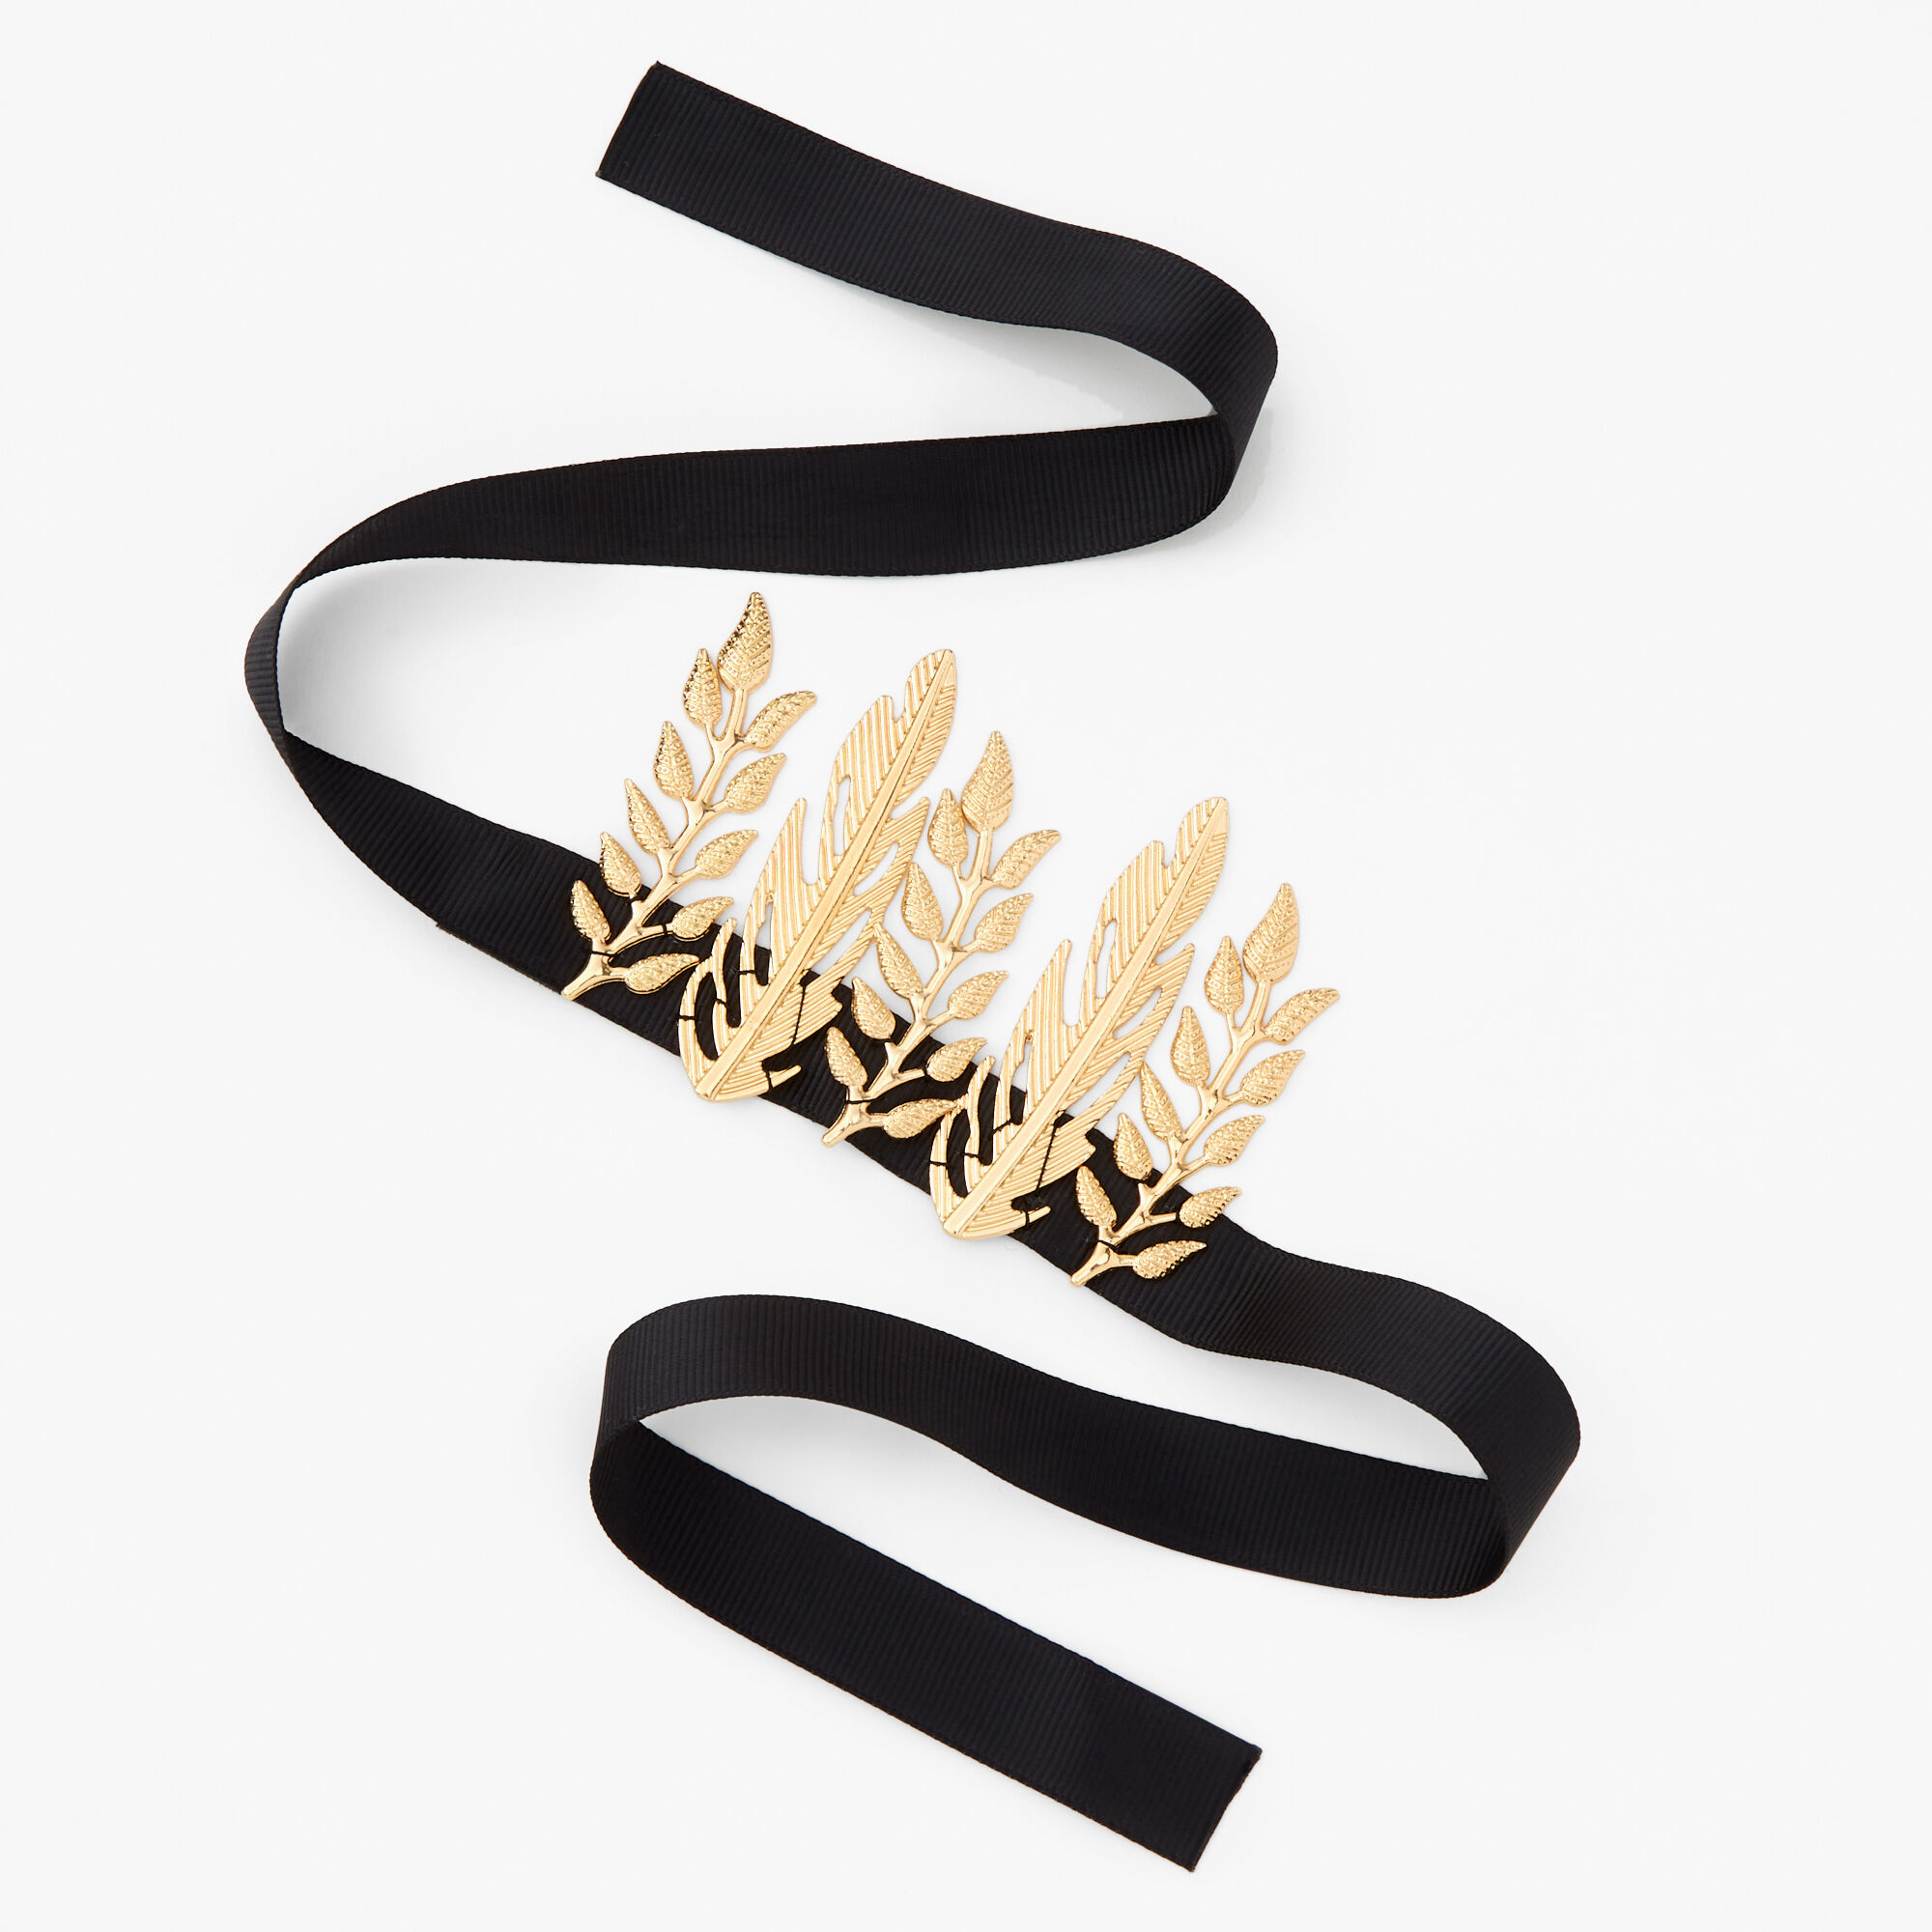 View Claires Leaf Headwrap Gold information